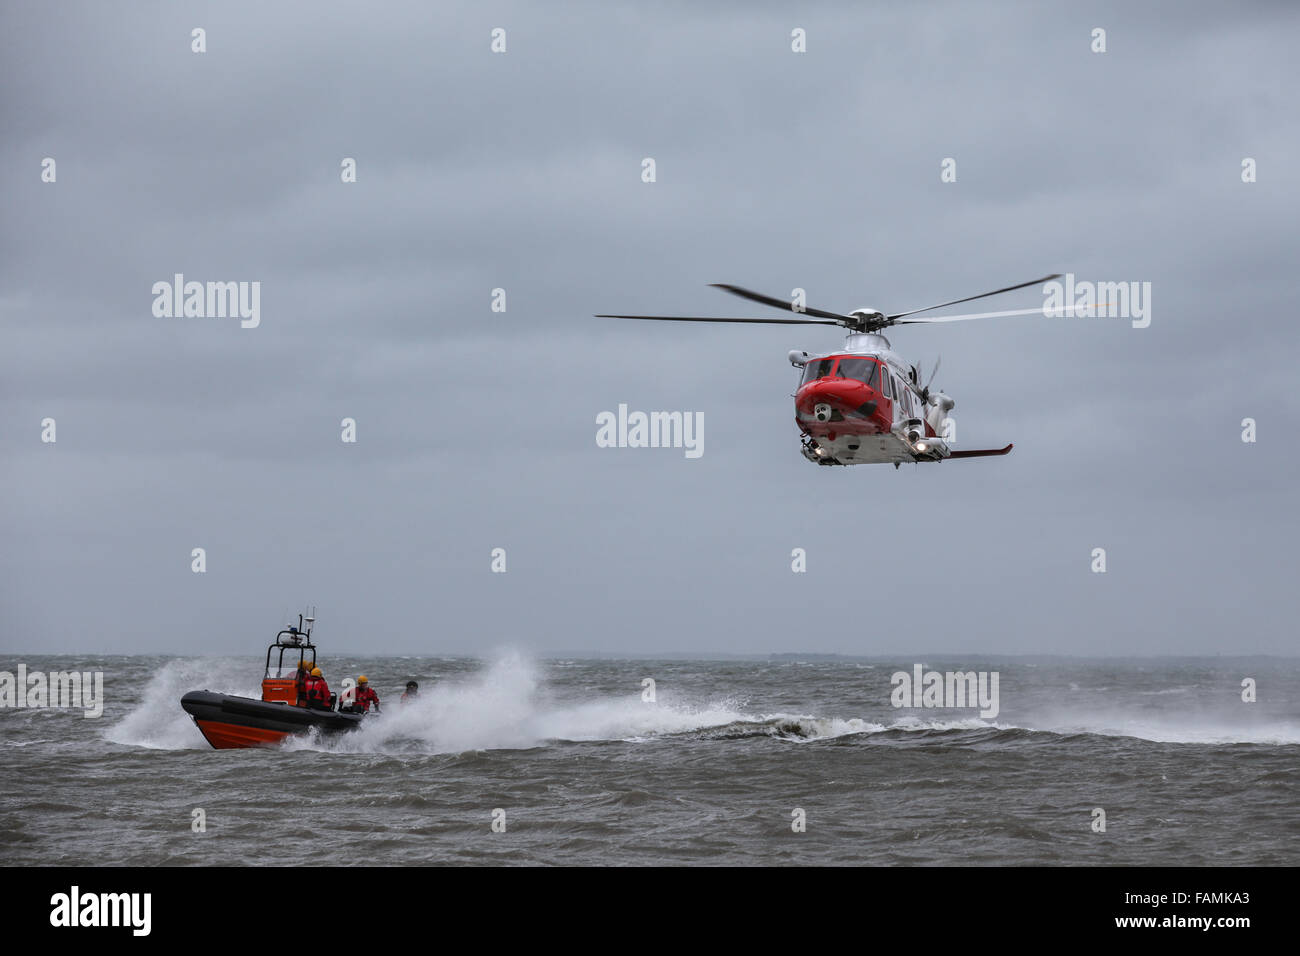 HM Coastguard Helicopter pictured during a rescue training exercise on a stormy day in the Solent Stock Photo